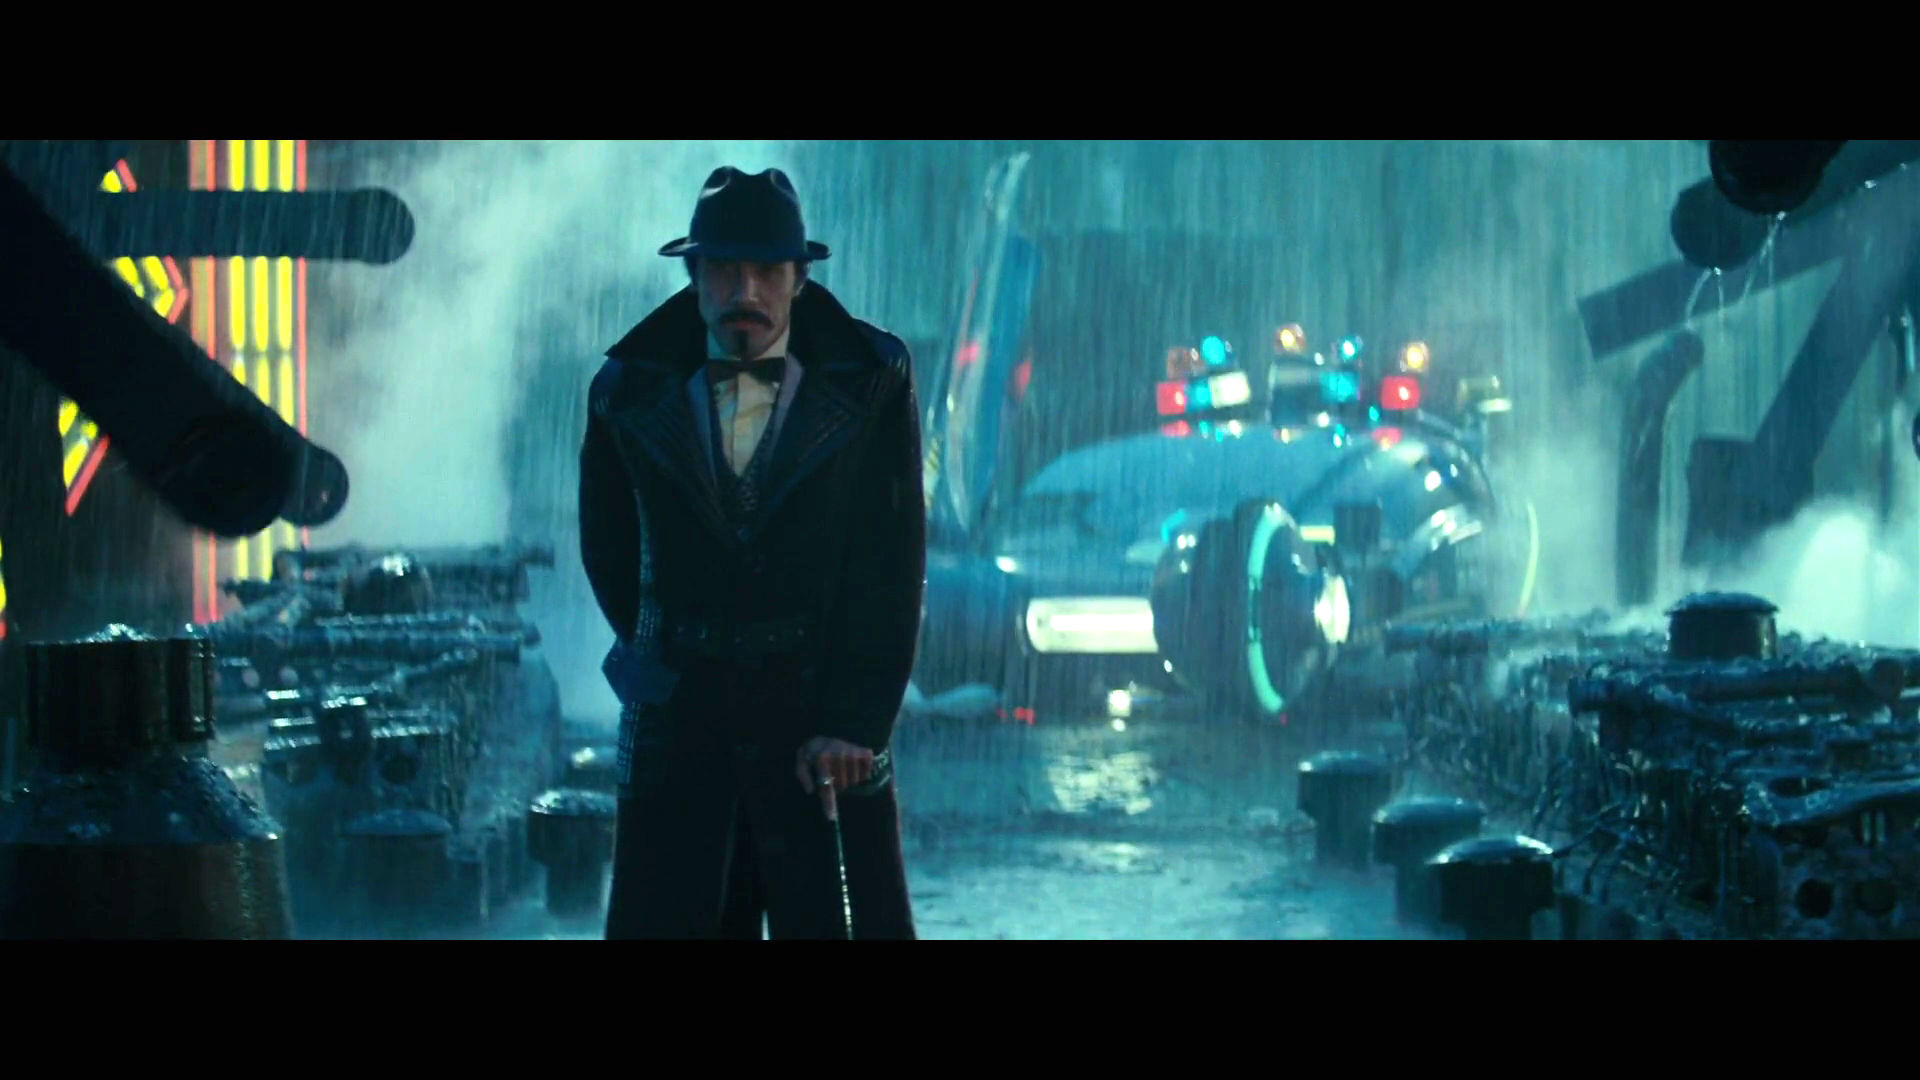 1920x1080 blade runner wallpaper - Buscar con Google | Rain and neon | Pinterest |  Blade runner, Blade runner art and Films